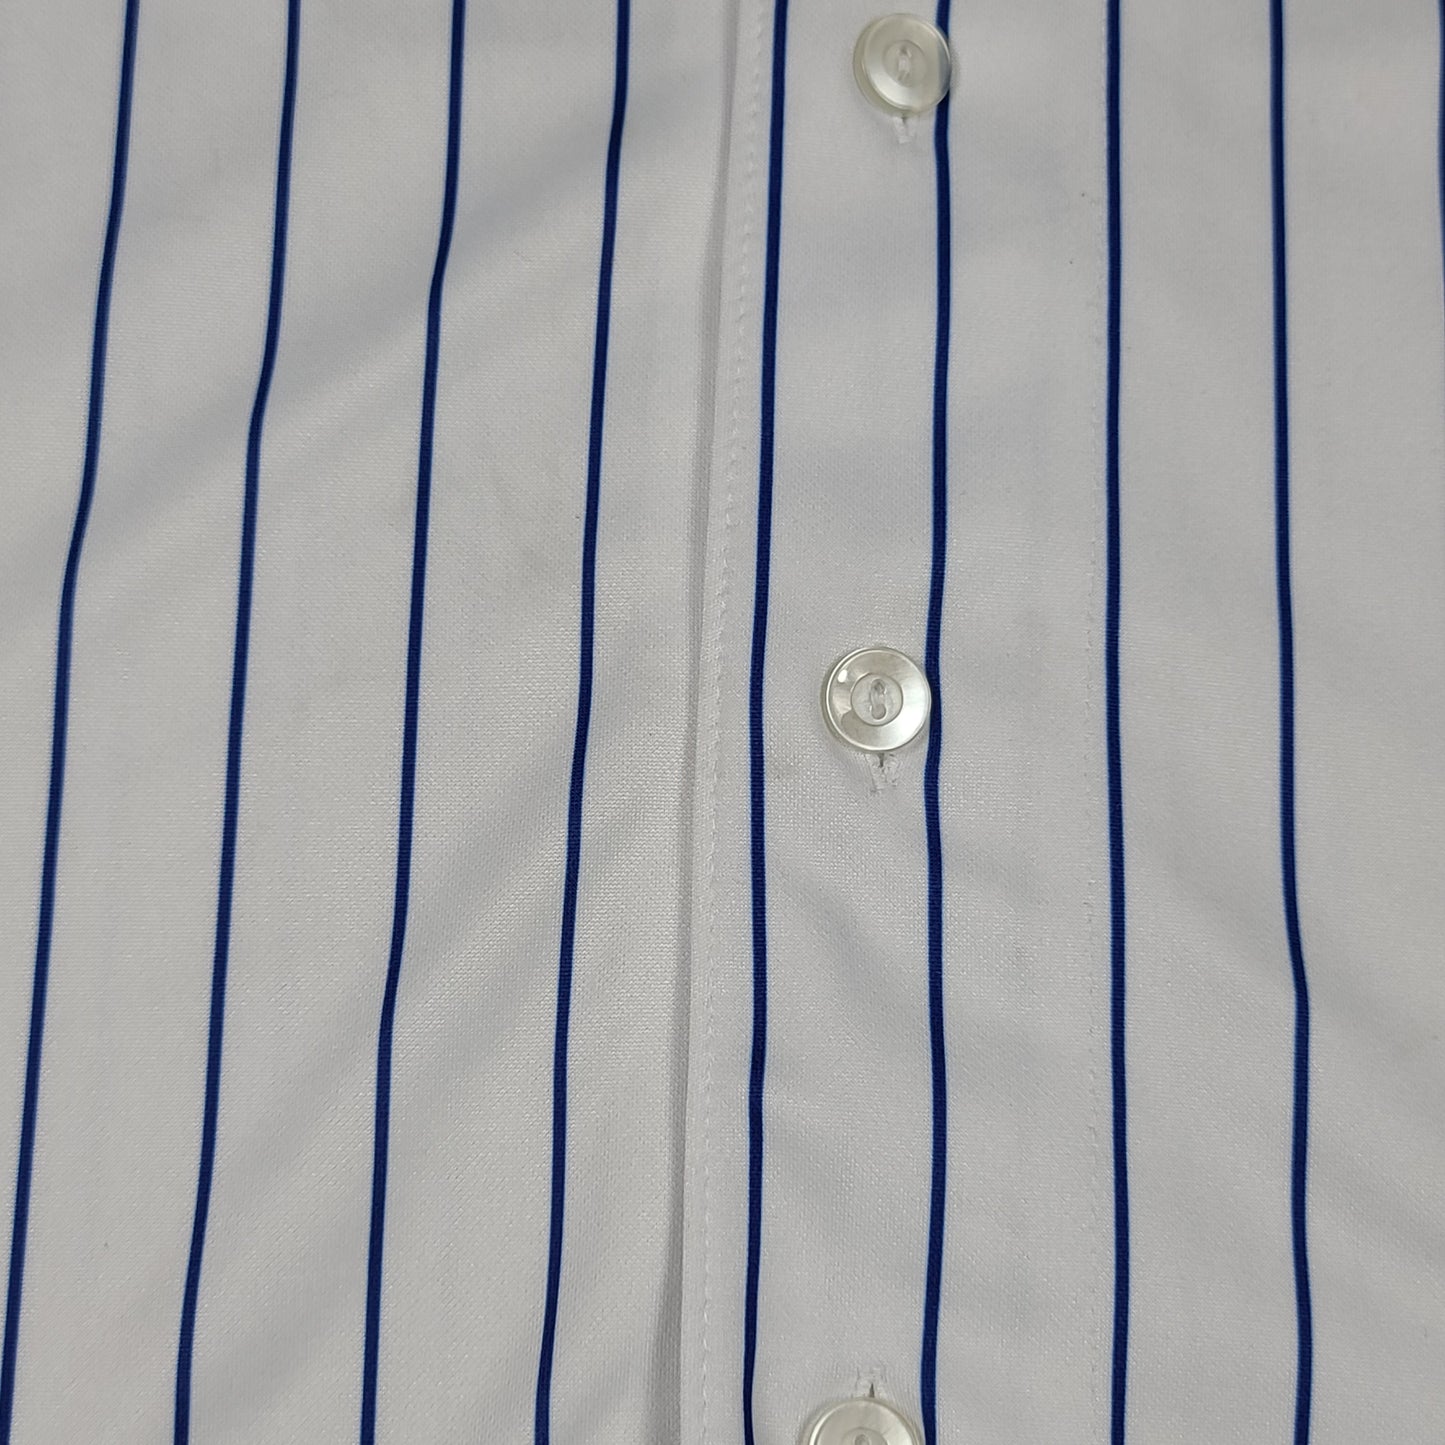 Geovany Soto Chicago Cubs MLB Pinstripe Majestic Baseball Jersey